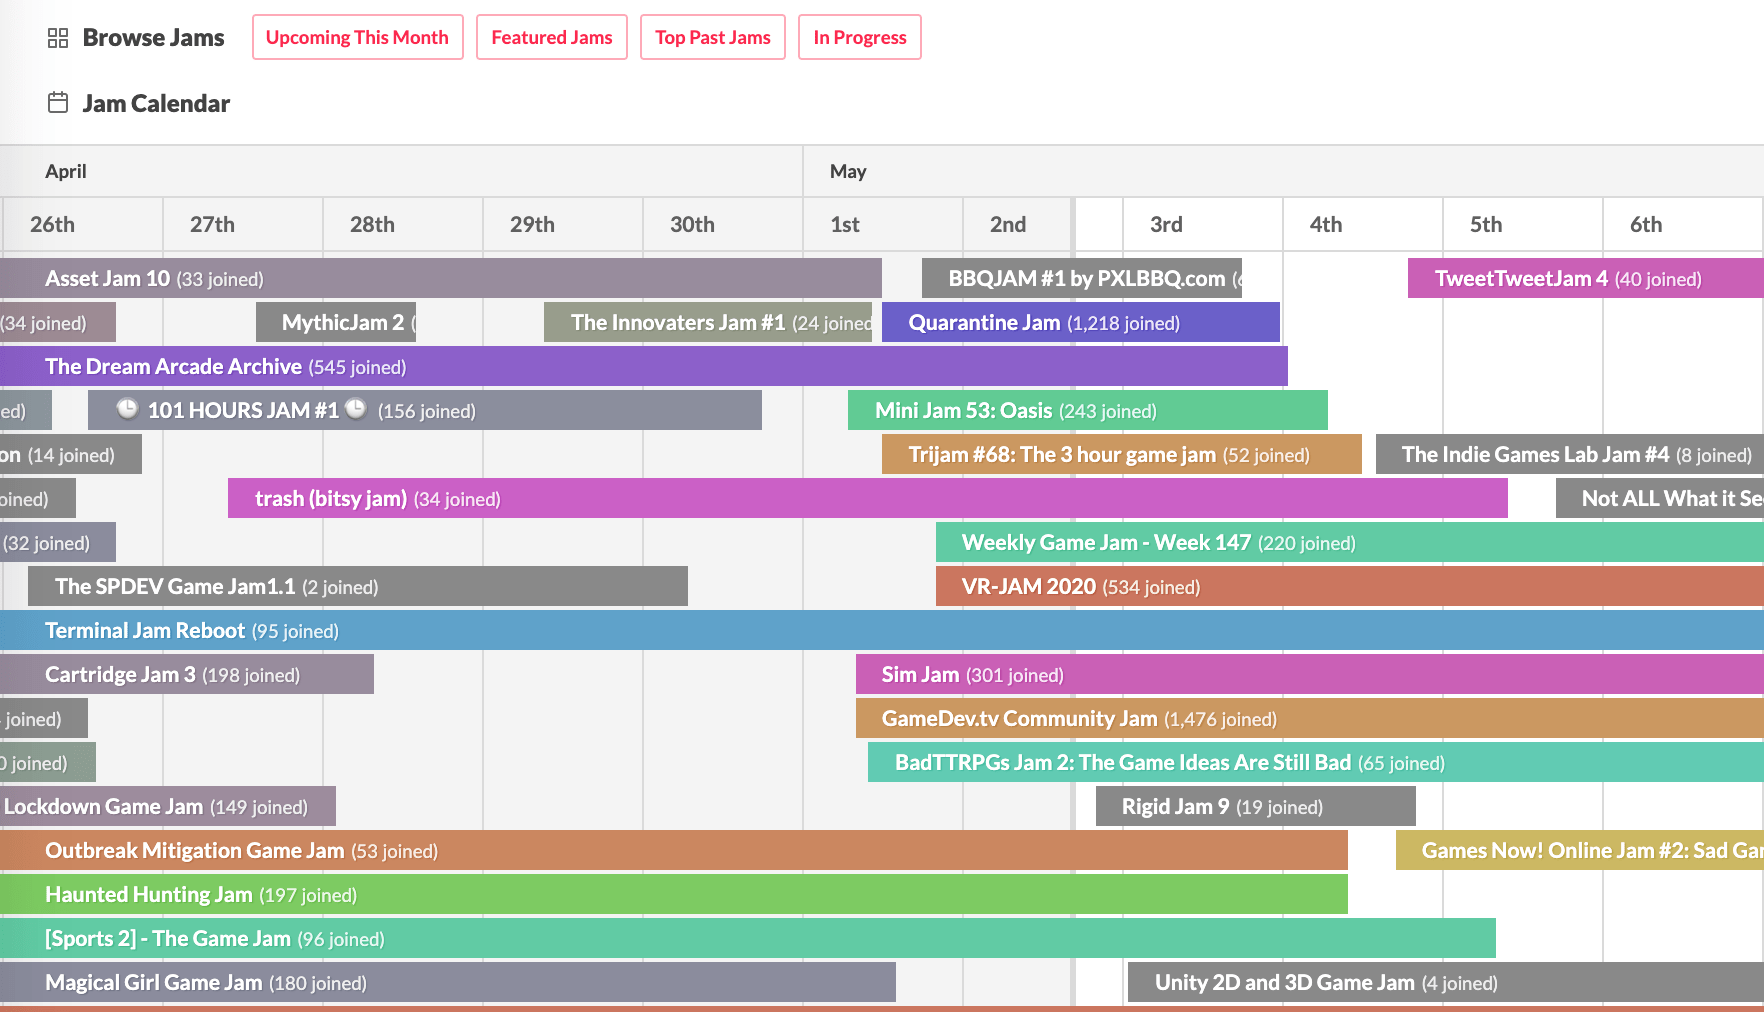 Related Content: Game Jams Calendar